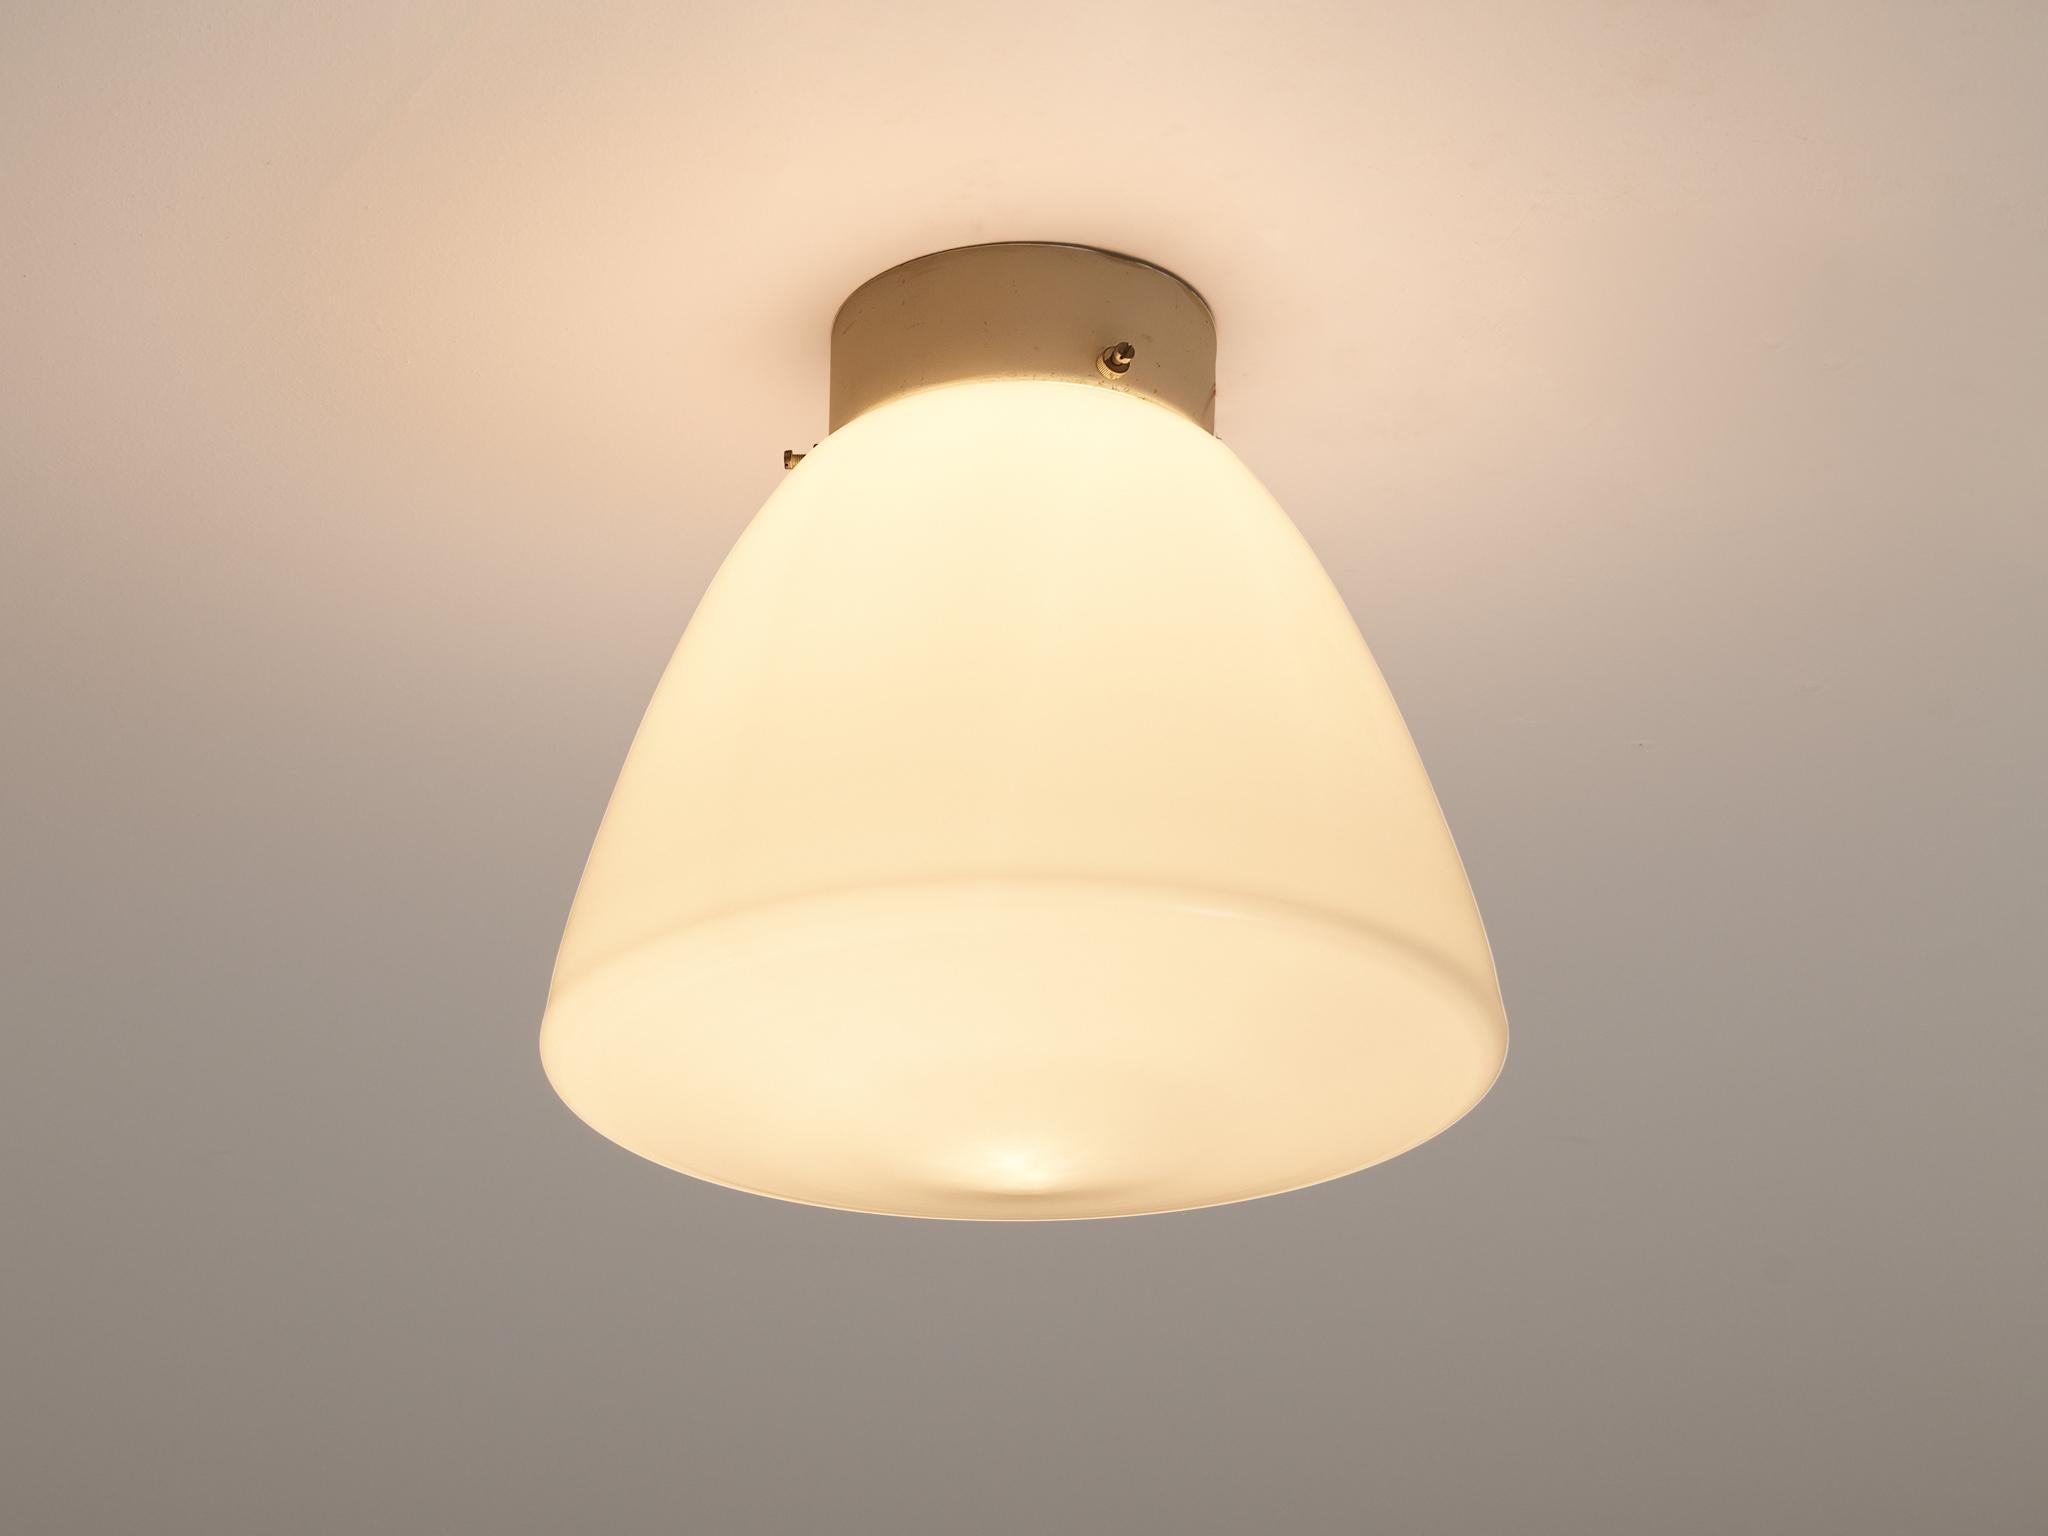 Ceiling light, opaline glass, lacquered metal, Europe, 1940s. 

This Art Deco ceiling light features a remarkable organic cone shaped glass shade. Contrary to the rounded lines, the closed bottom of the shade is sharply lined. A white lacquered